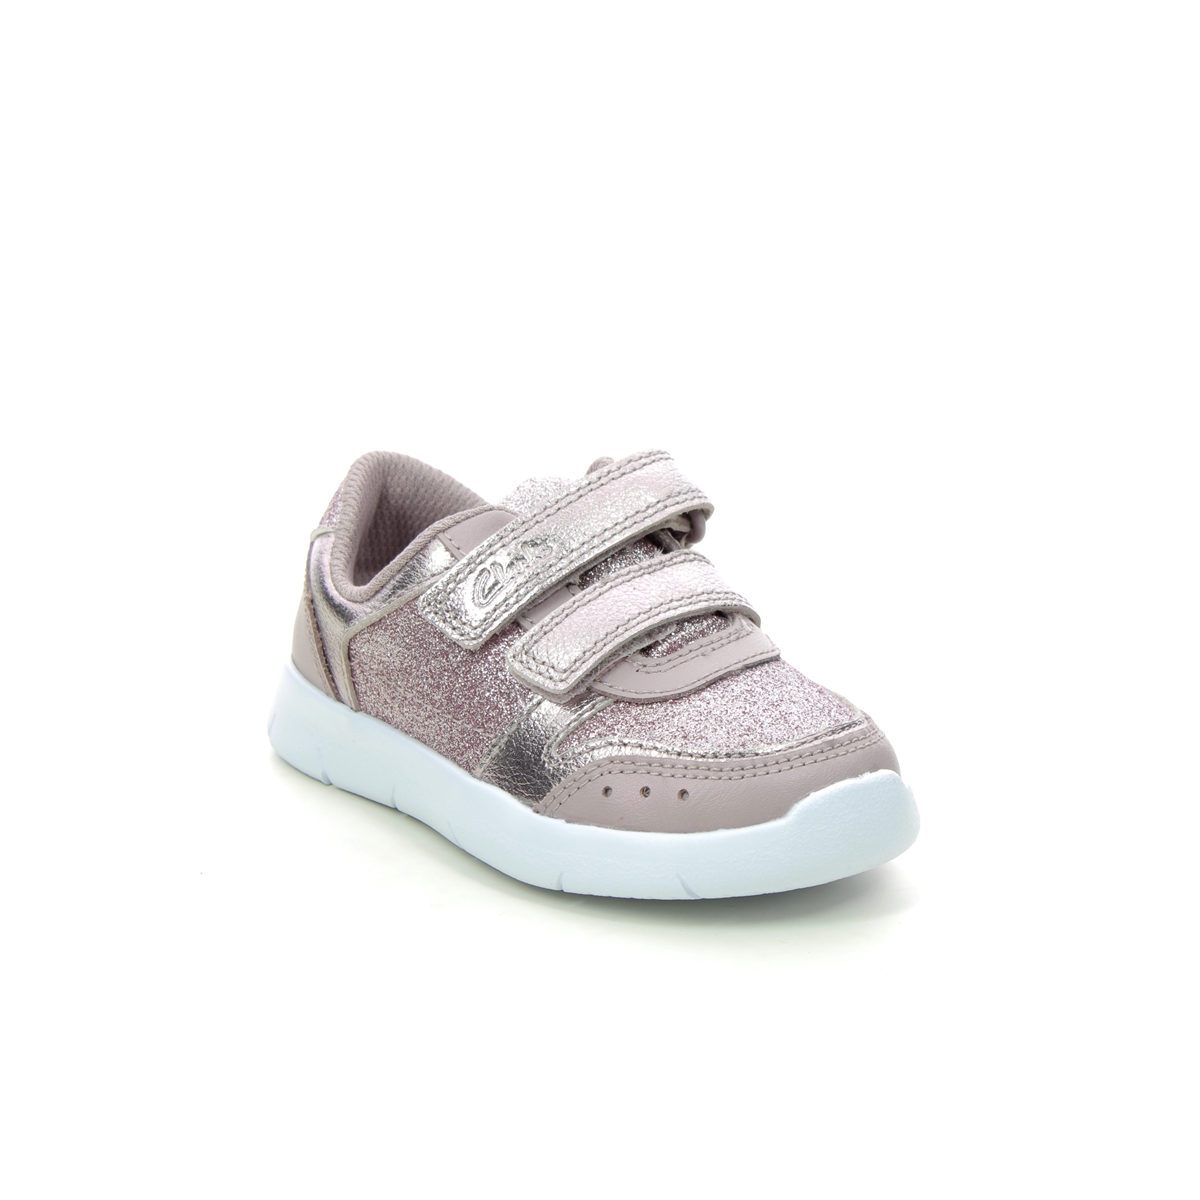 Clarks Ath Sonar T Pink Kids Toddler Girls Trainers 683727G In Size 4 In Plain Pink G Width Fitting For kids